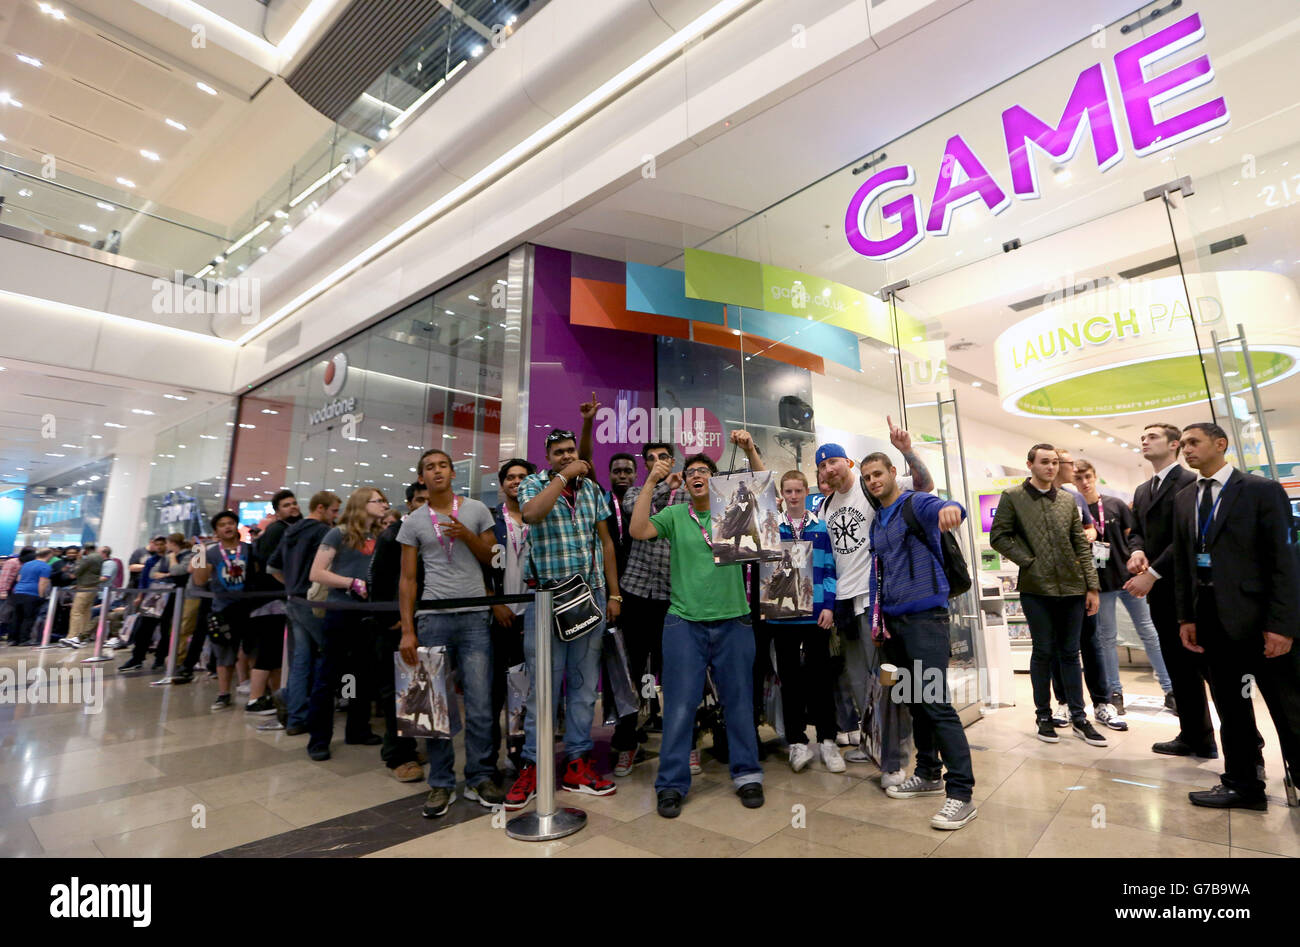 Left to right: Andre Toth, 15 and Csaba Toth, 38 from Wood Green North London are the first people to pick up Destiny, the latest game from the creators of Halo, after its midnight release at GAME in Westfield Stratford City in London. PRESS ASSOCIATION Picture date: Monday September 8, 2014. Photo credit should read: Matt Alexander/PA Stock Photo